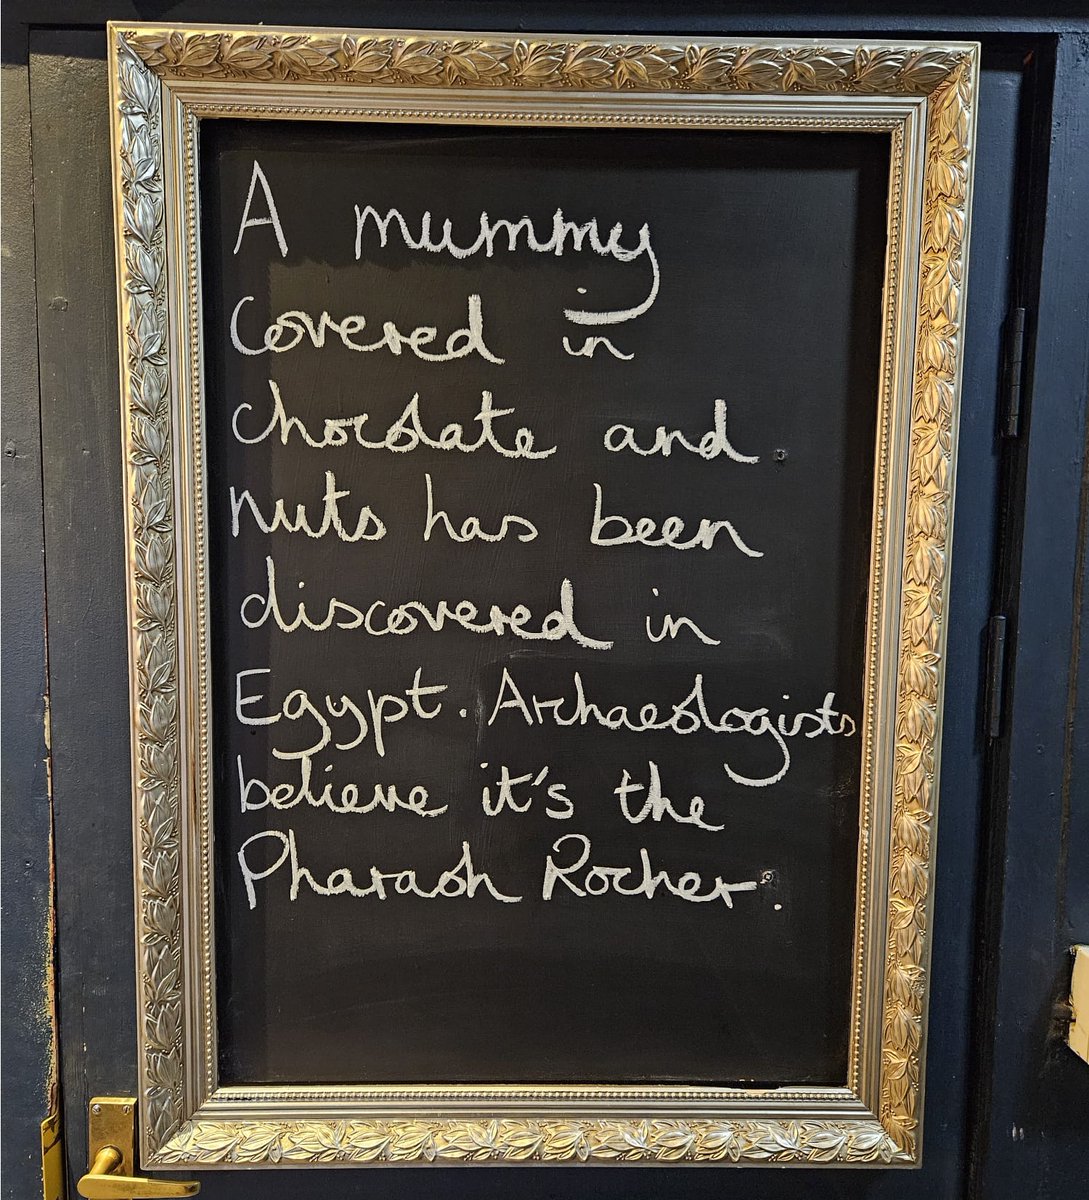 How many attempts do you reckon it took me to correctly spell 'archaeologists'? #ChalkboardPuns #ThePortland